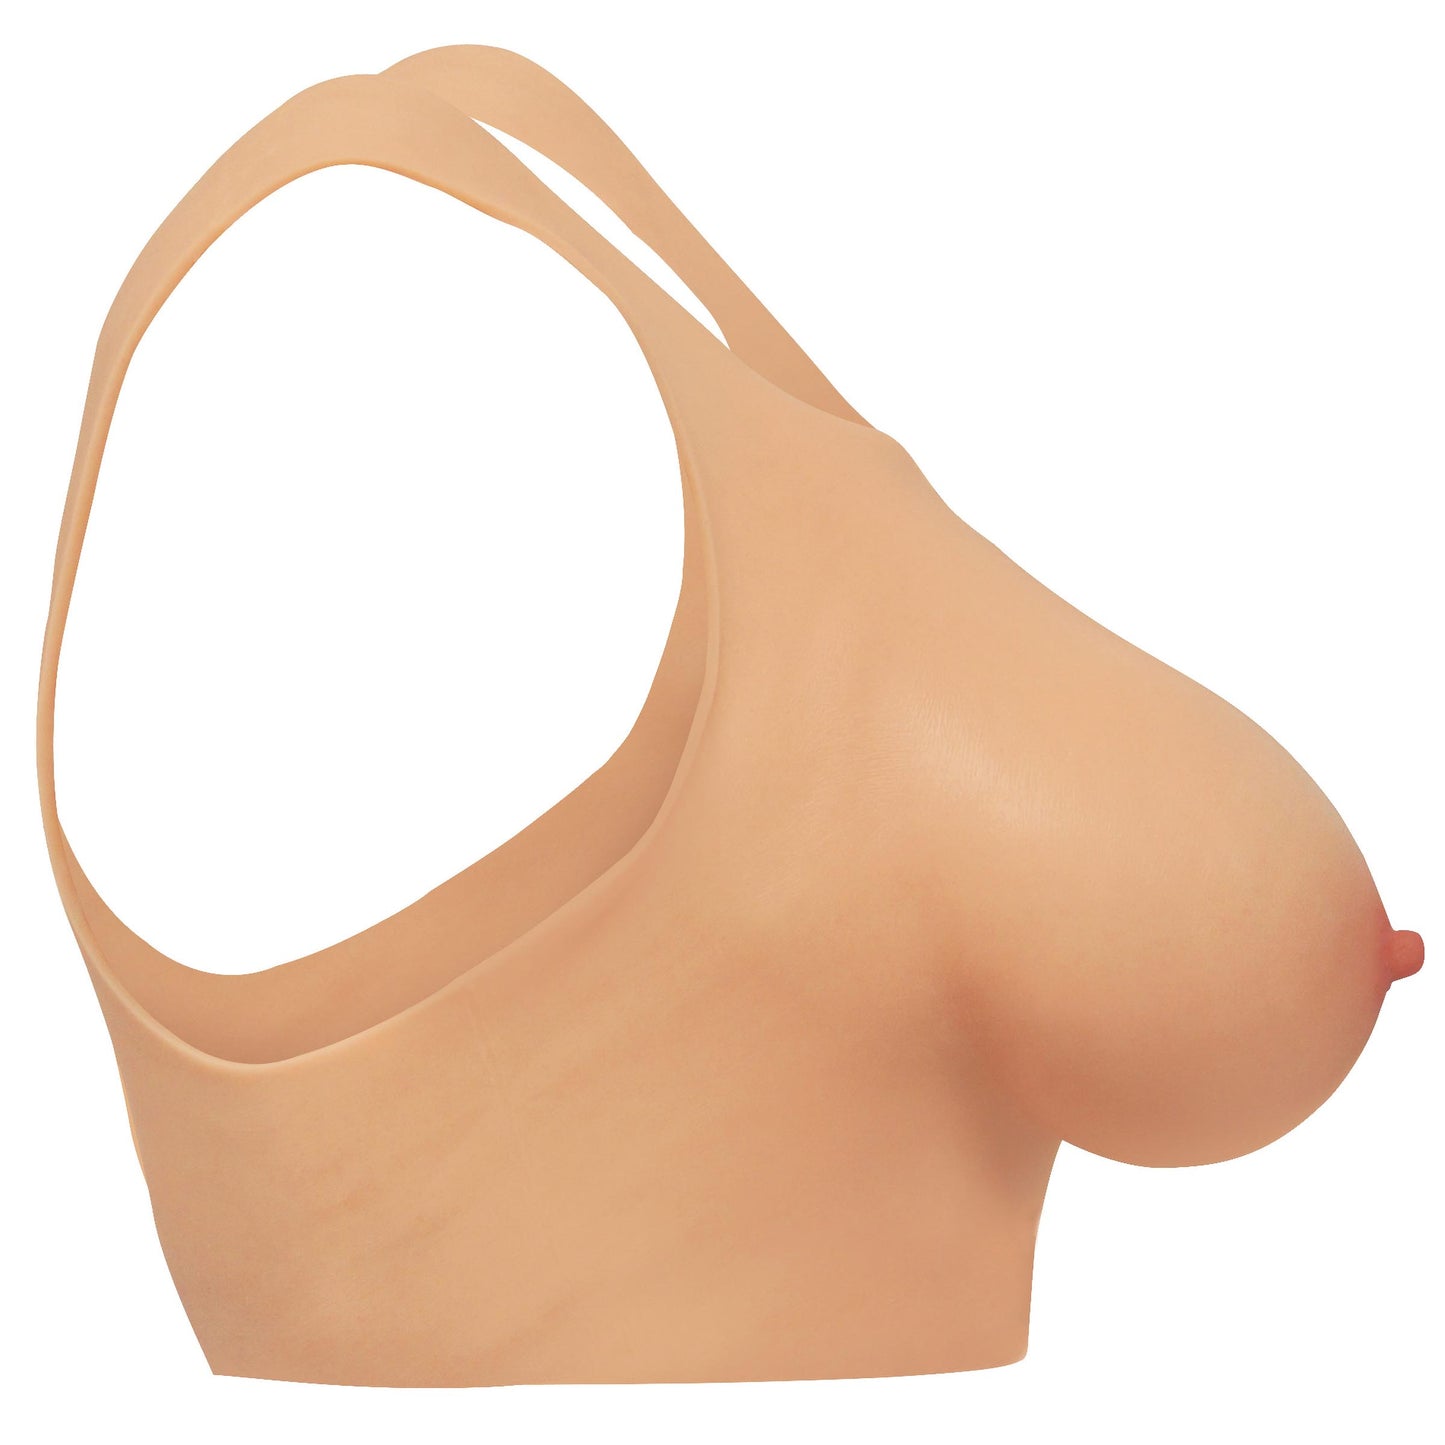 Perky Pair D Cup Wearable Silicone Breasts